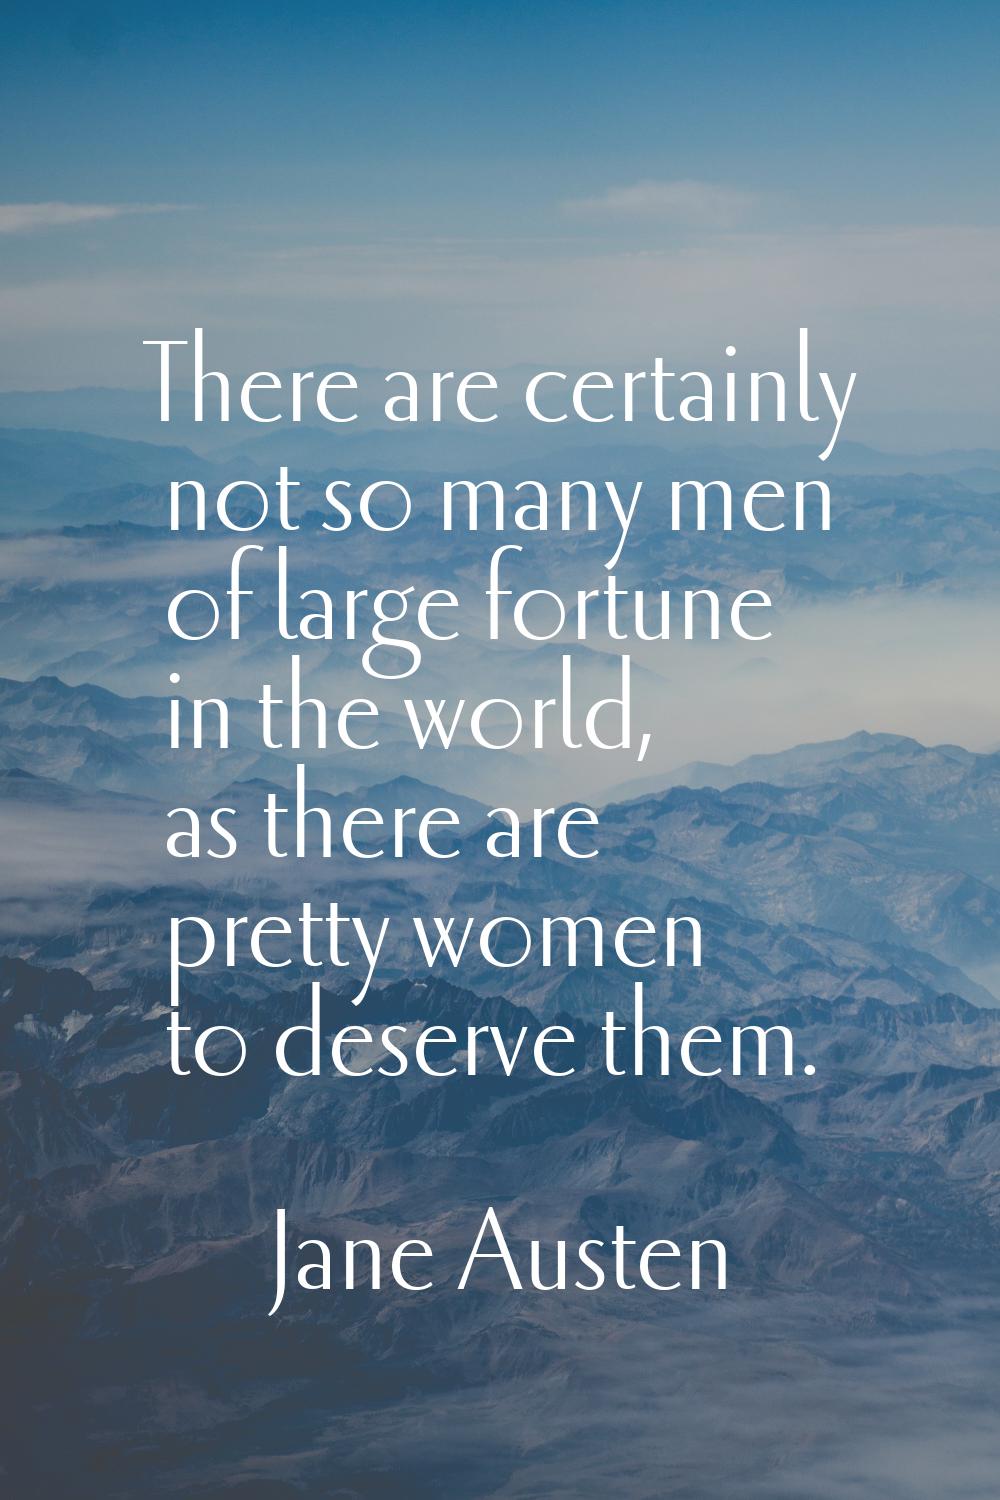 There are certainly not so many men of large fortune in the world, as there are pretty women to des